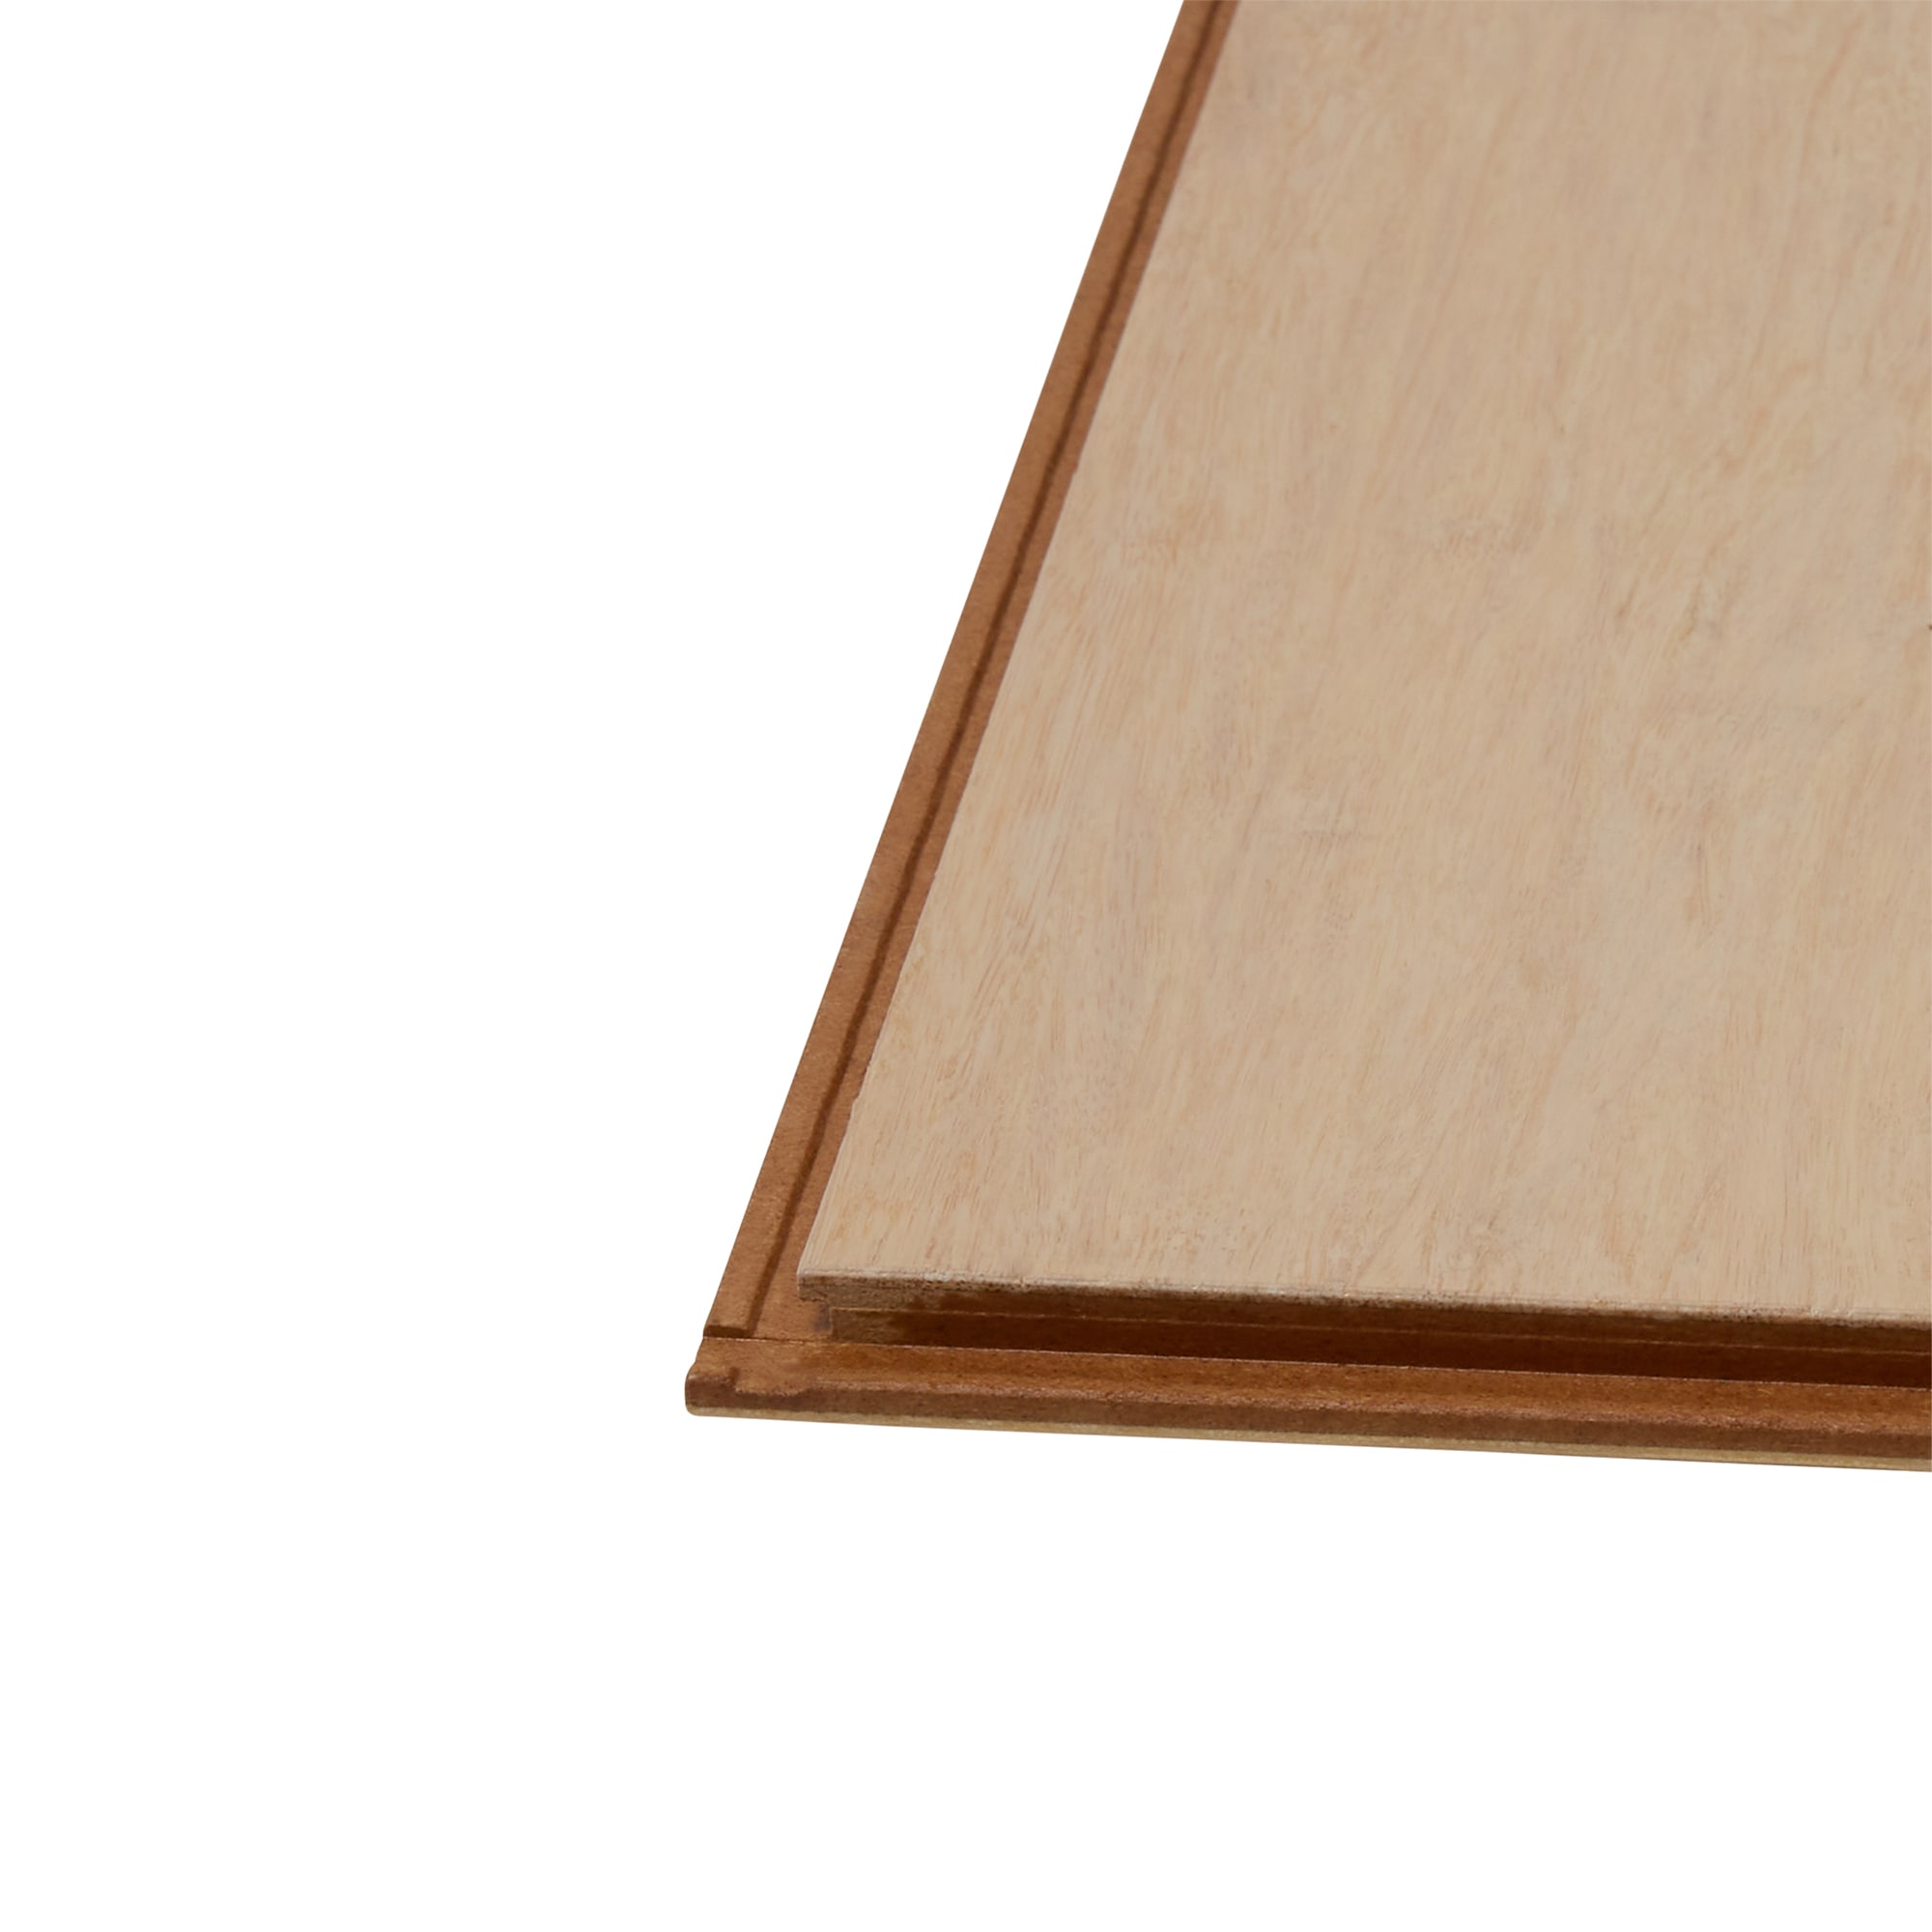 Bamboo boards (exotic wood) - types and prices 